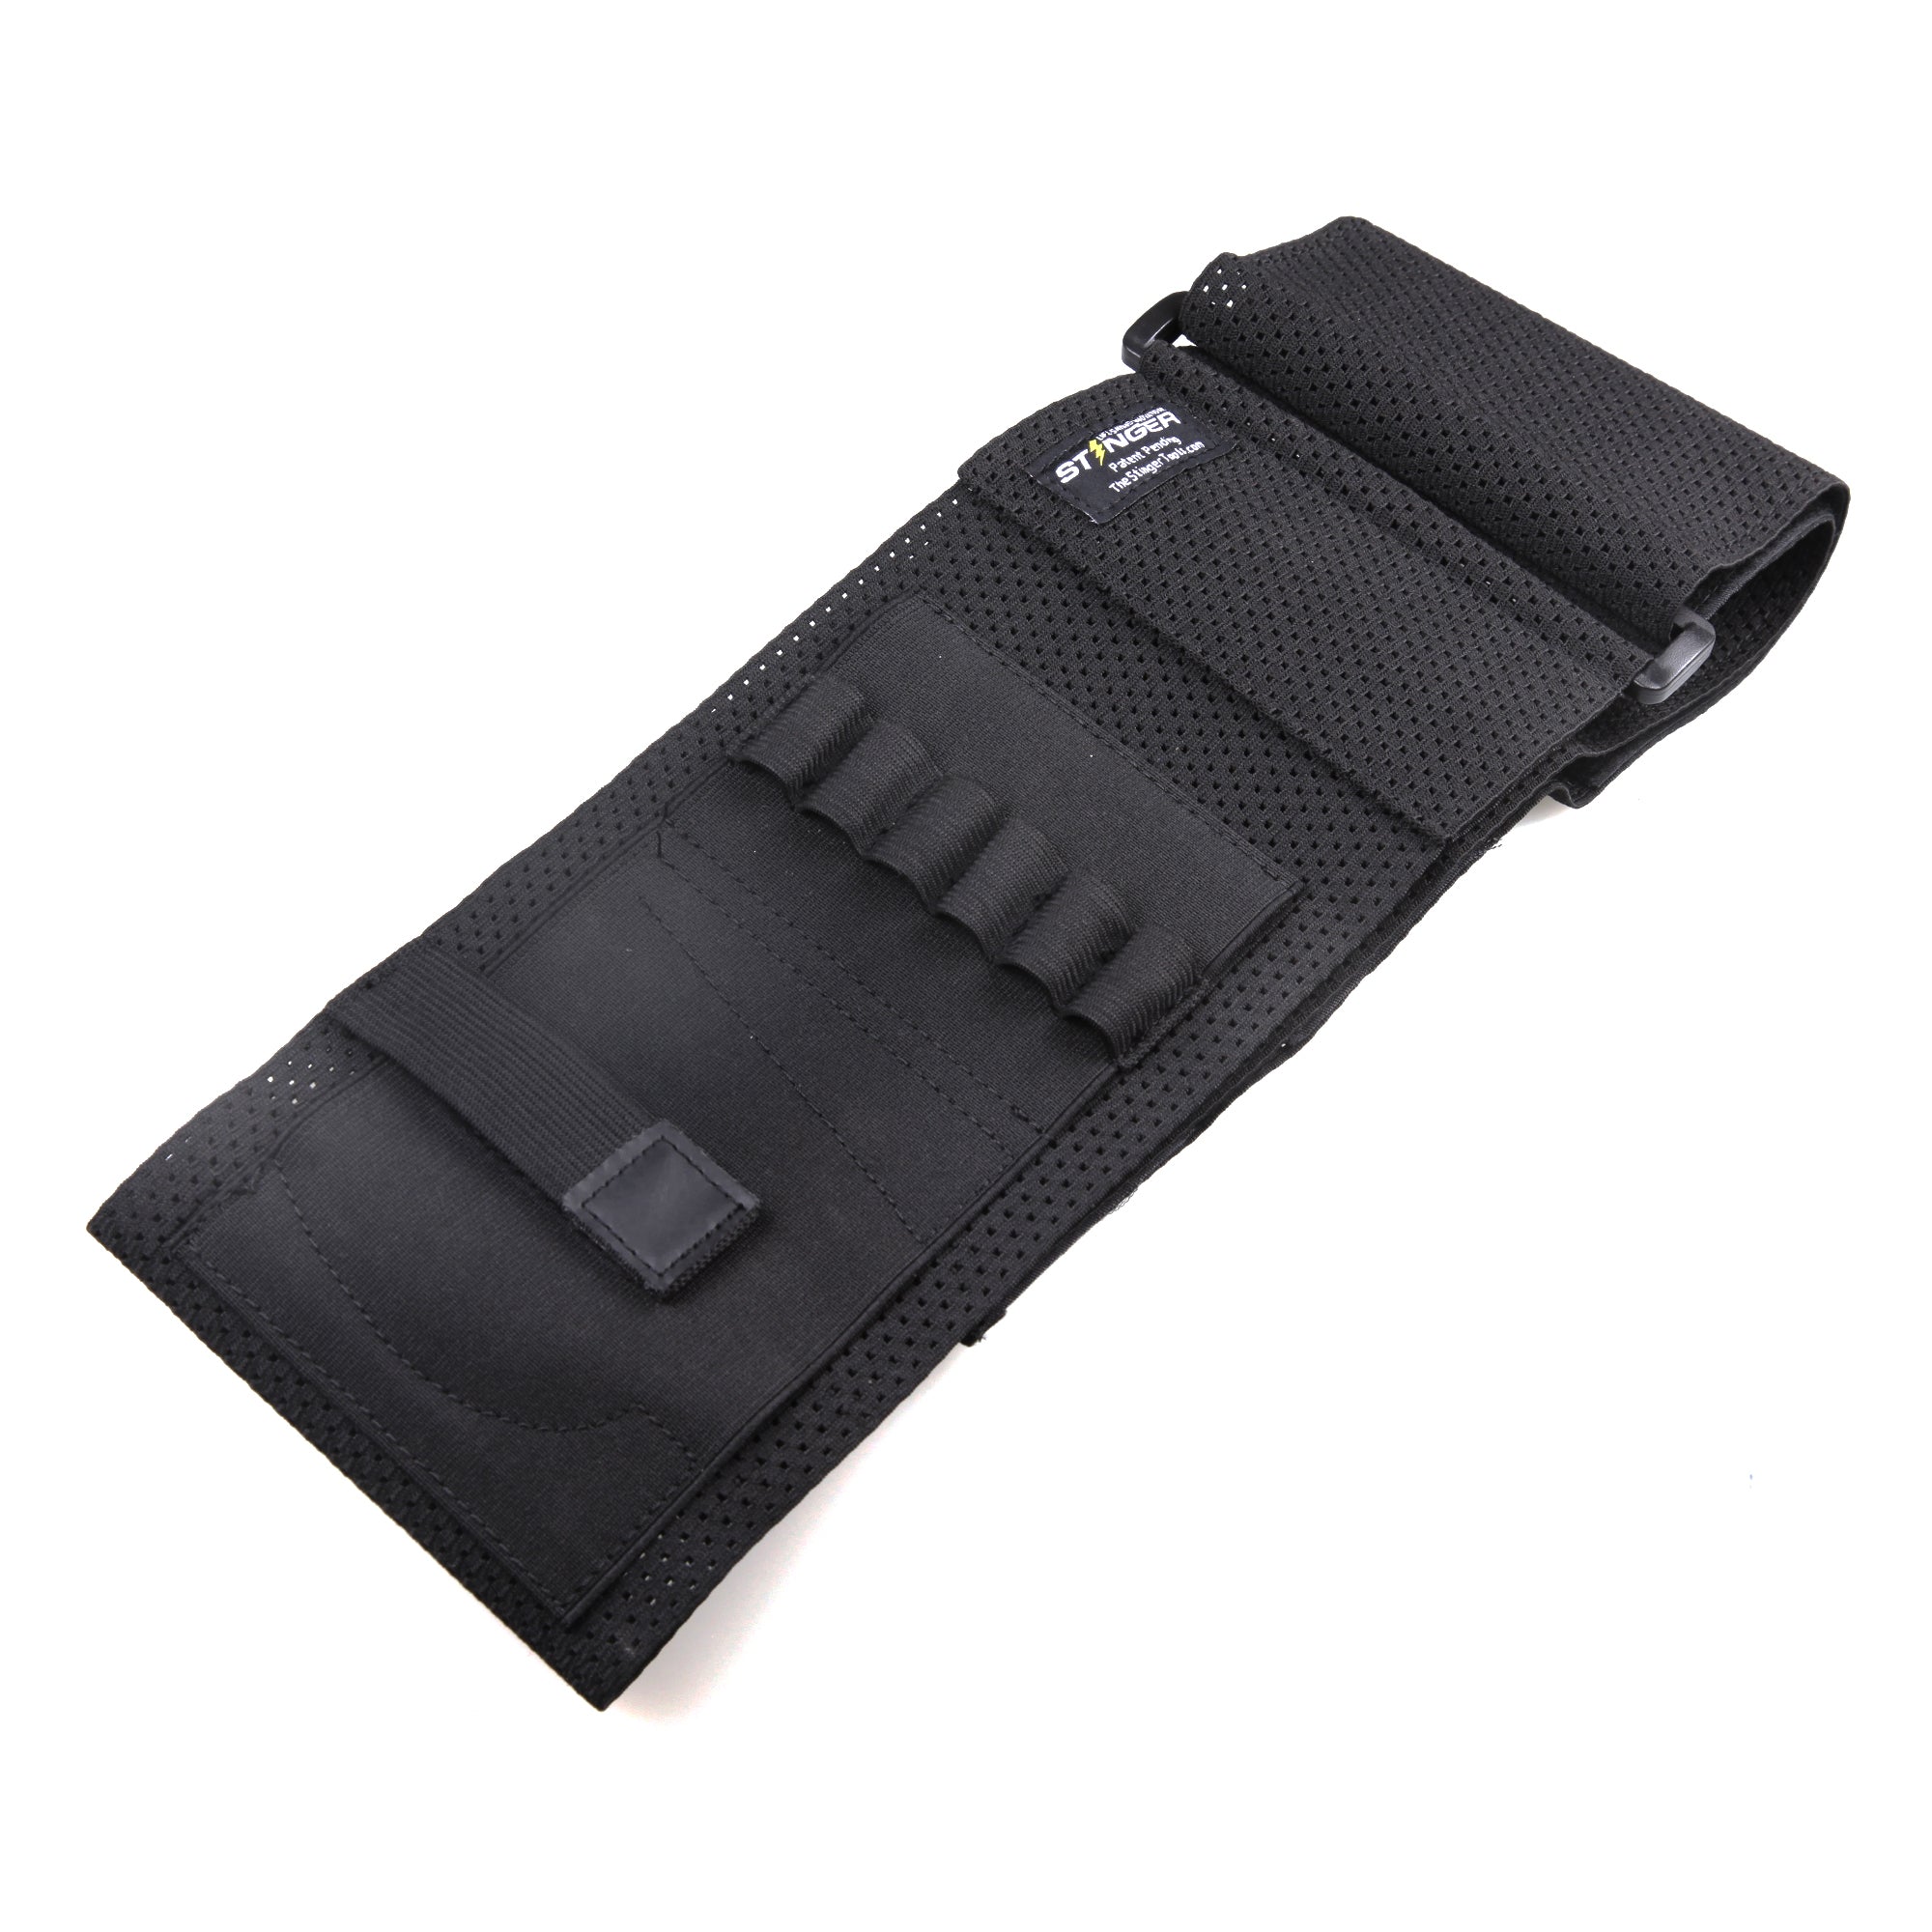  Stinger Premium Ultra Breathable Belly Band Holster, Concealed  Carry, IWB OWB Holster, Fabric Comfortable Waistband Handgun Holster, Ammo  Bandolier for Extra Round of Revolver Bullet (46 inch, Left) : Sports